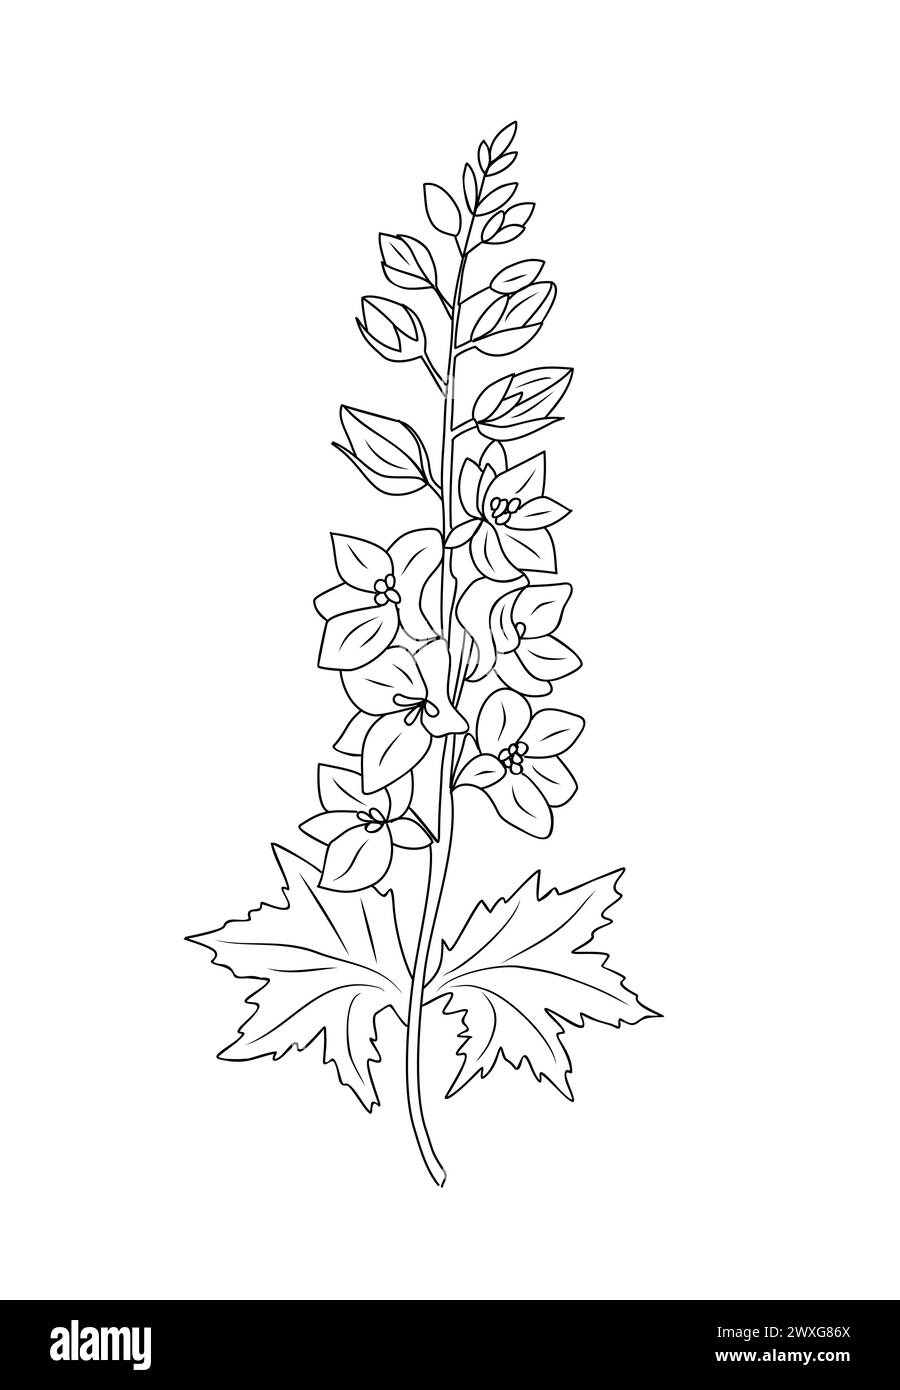 Larkspur flower line art vector drawing isolated.  Stock Vector